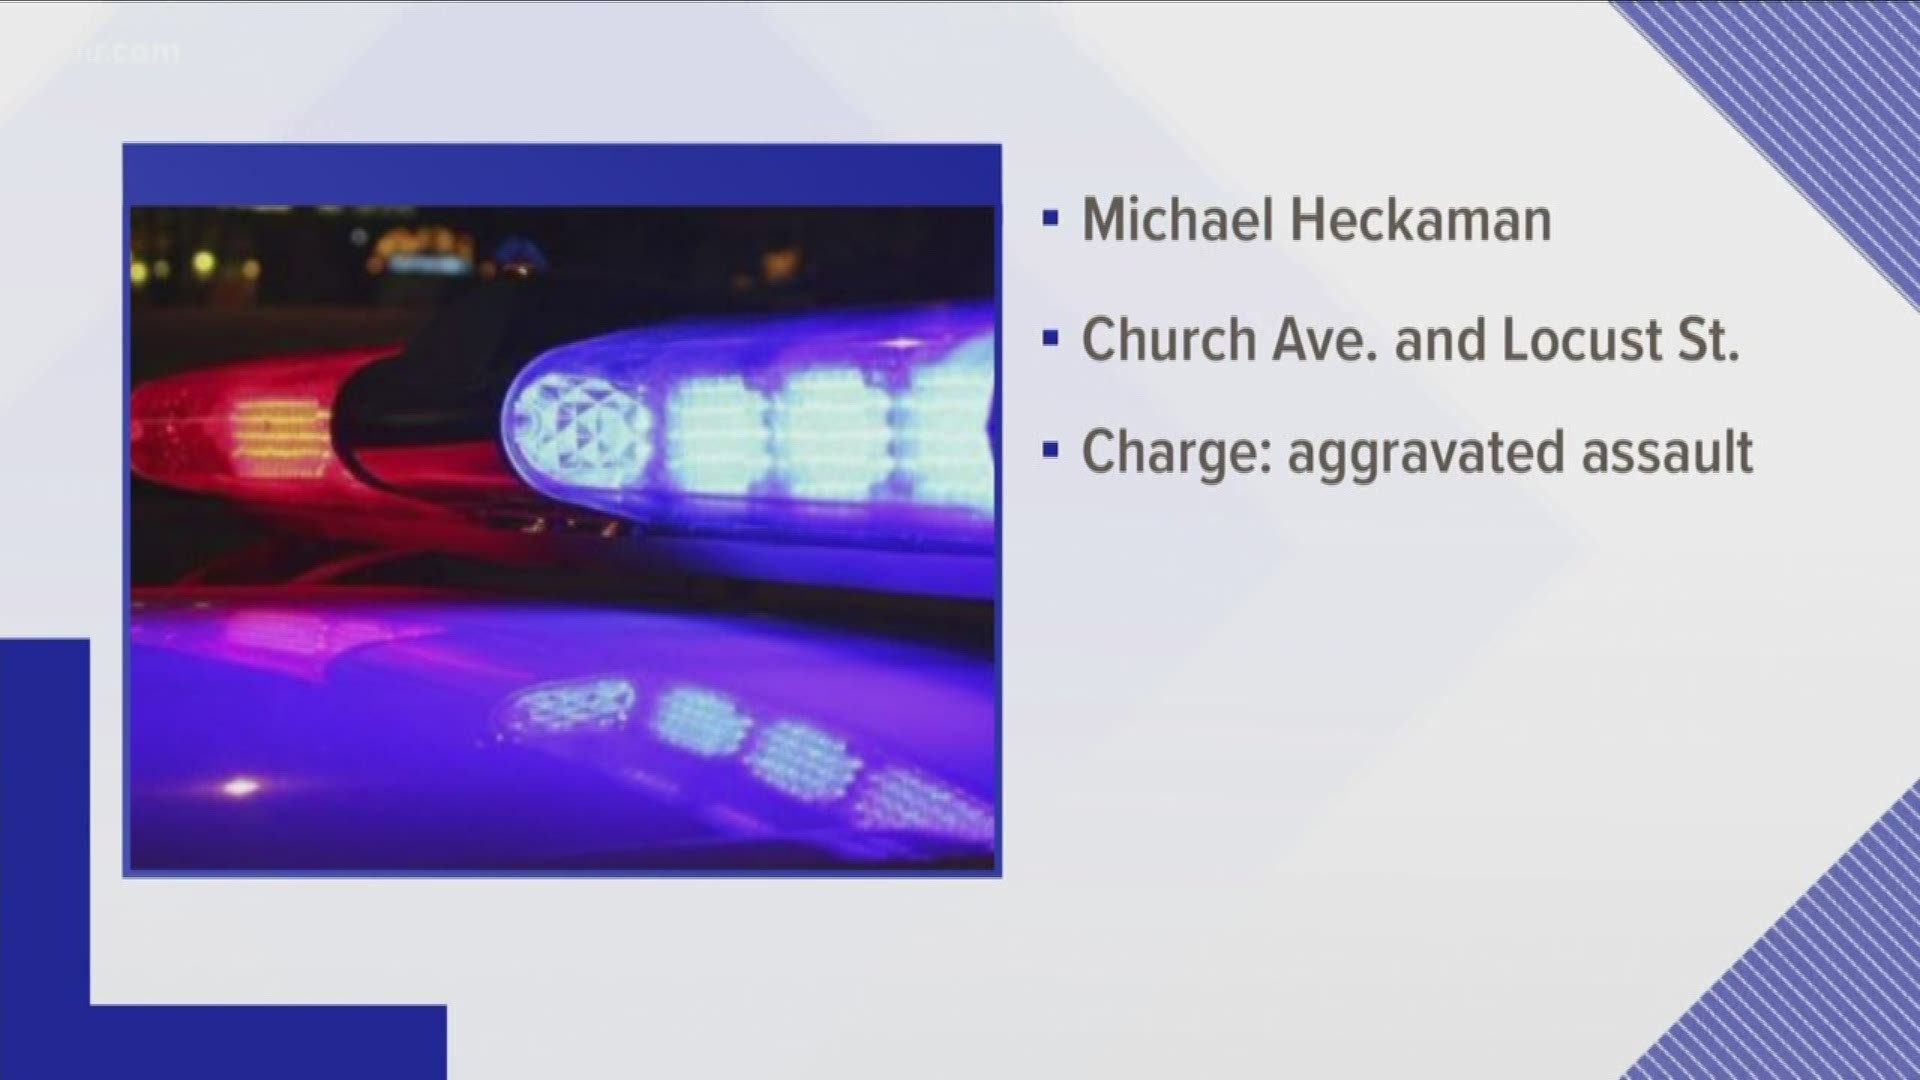 KPD said Michael Heckaman, 22, was driving and cut off a family near Church Avenue and Locust Street, got out of his vehicle and waved a black BB gun at the family.